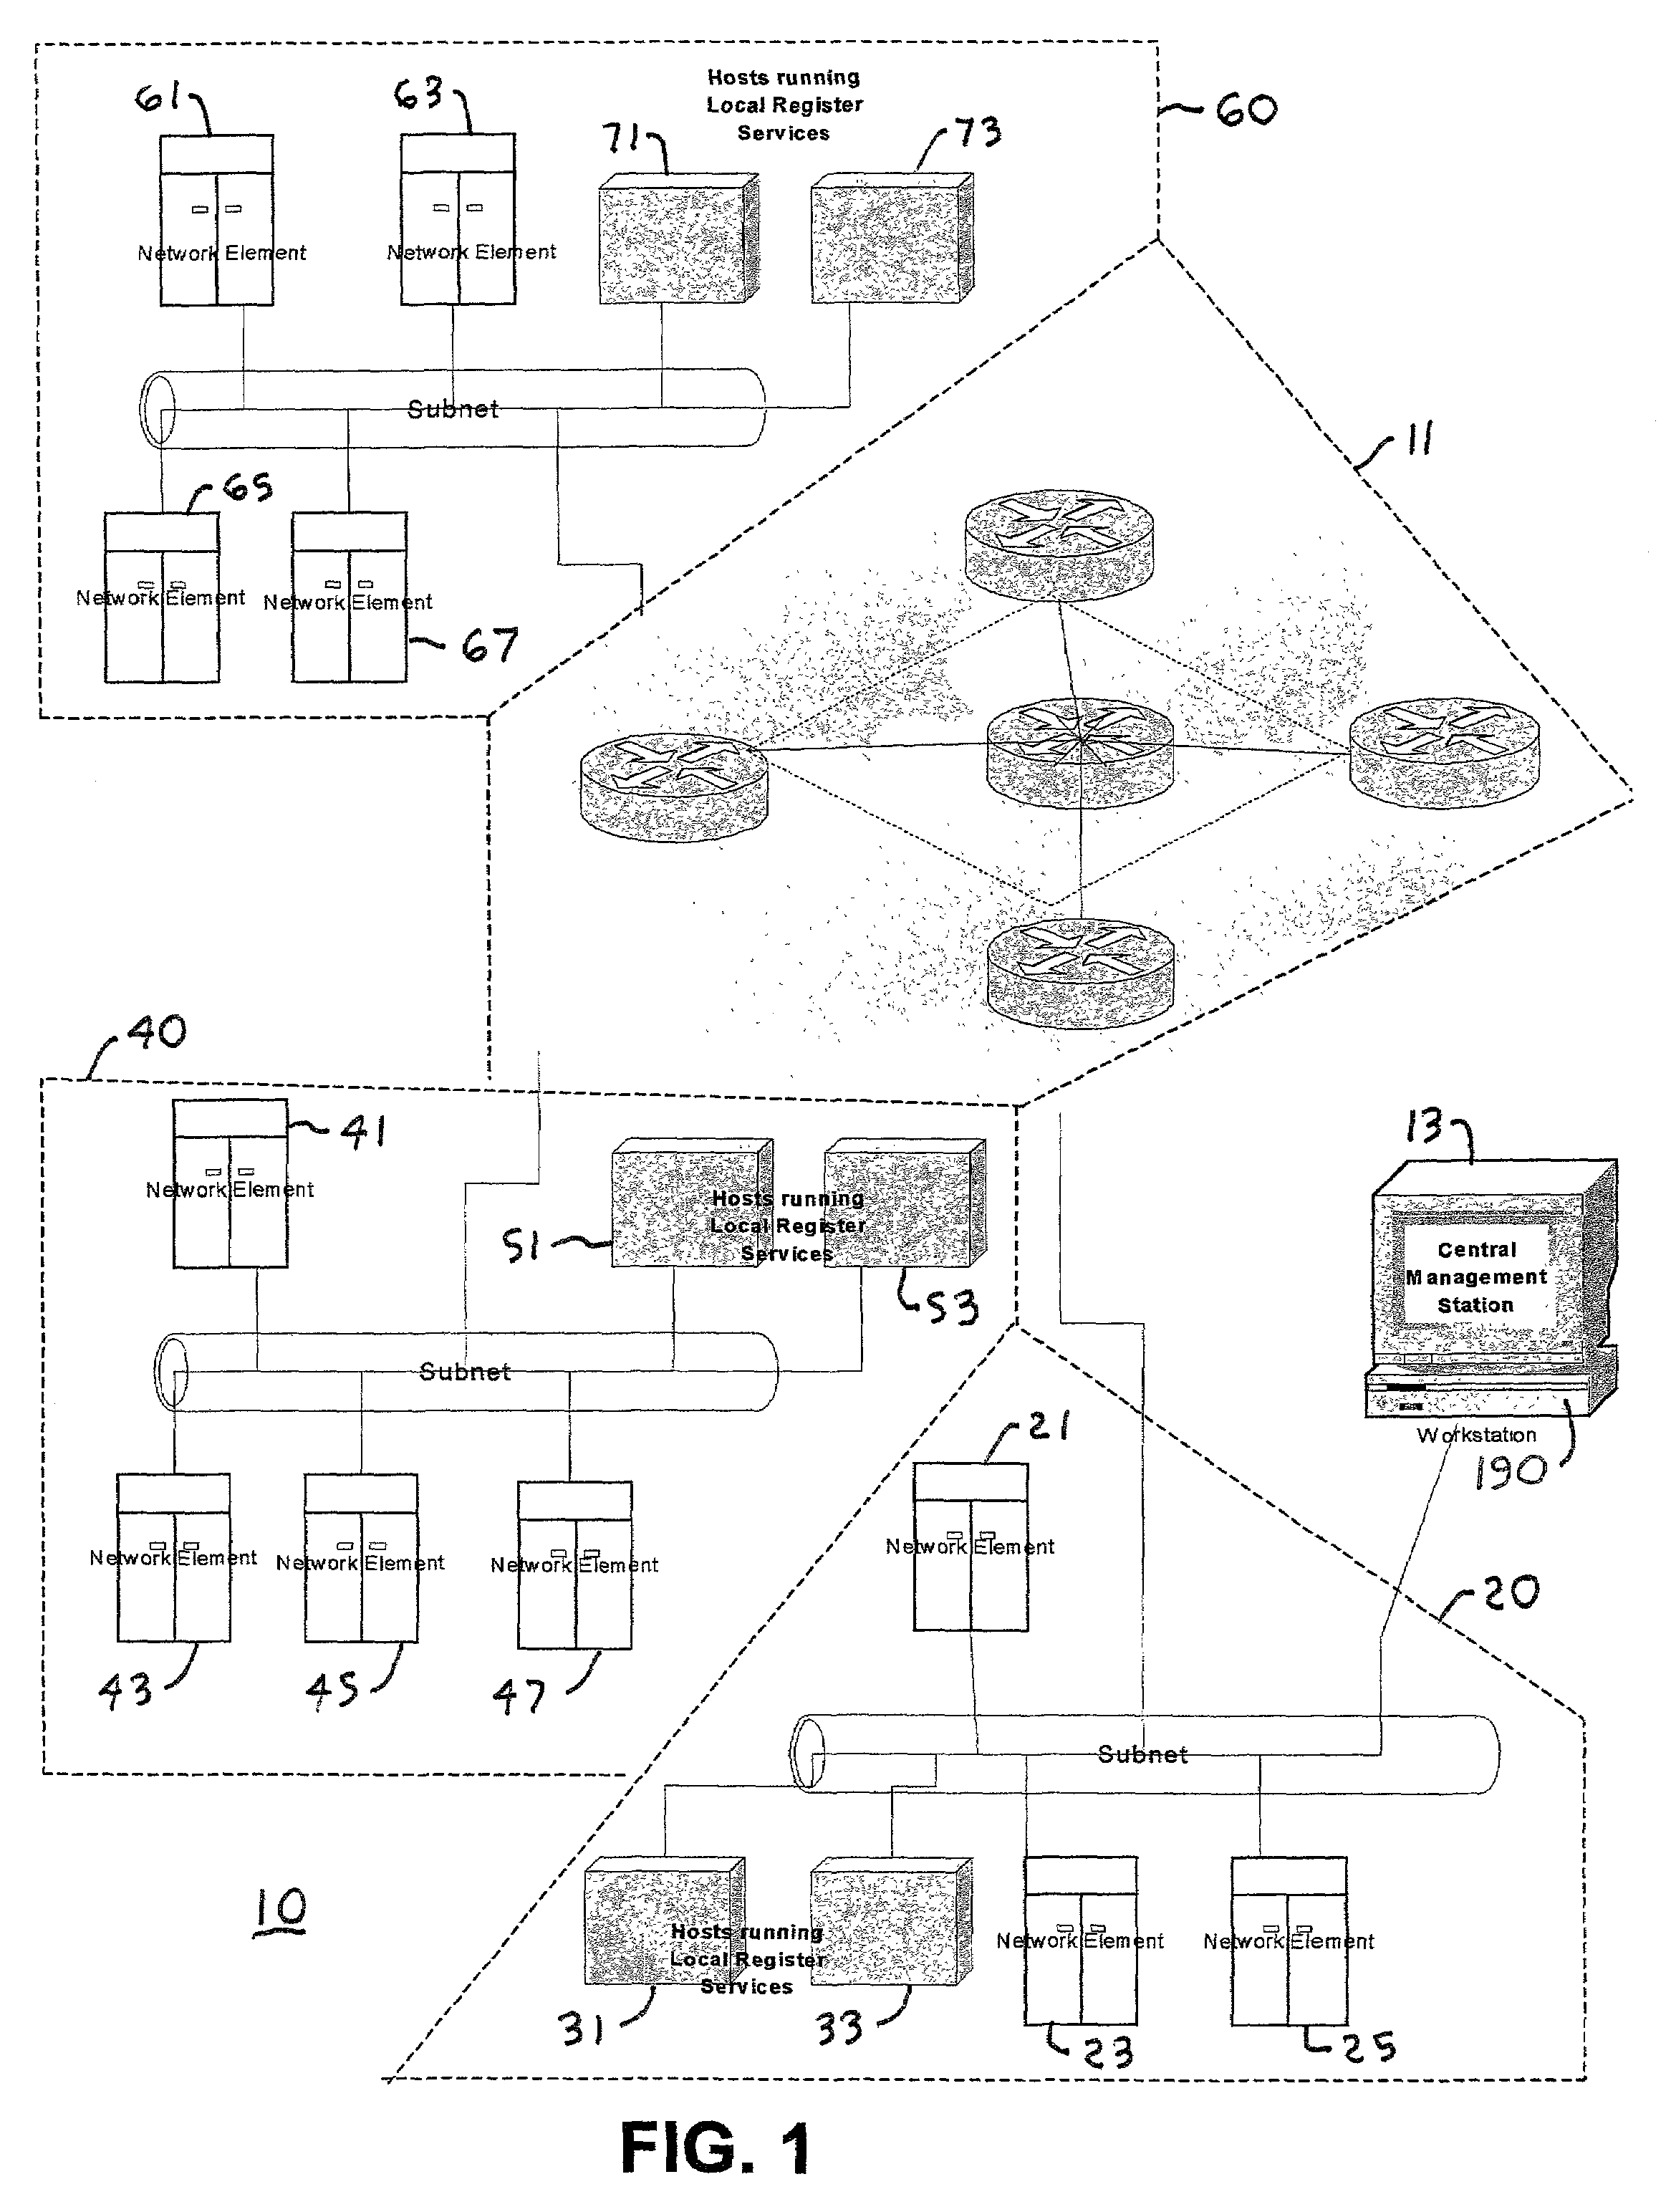 Method and system for auto discovery of IP-based network elements